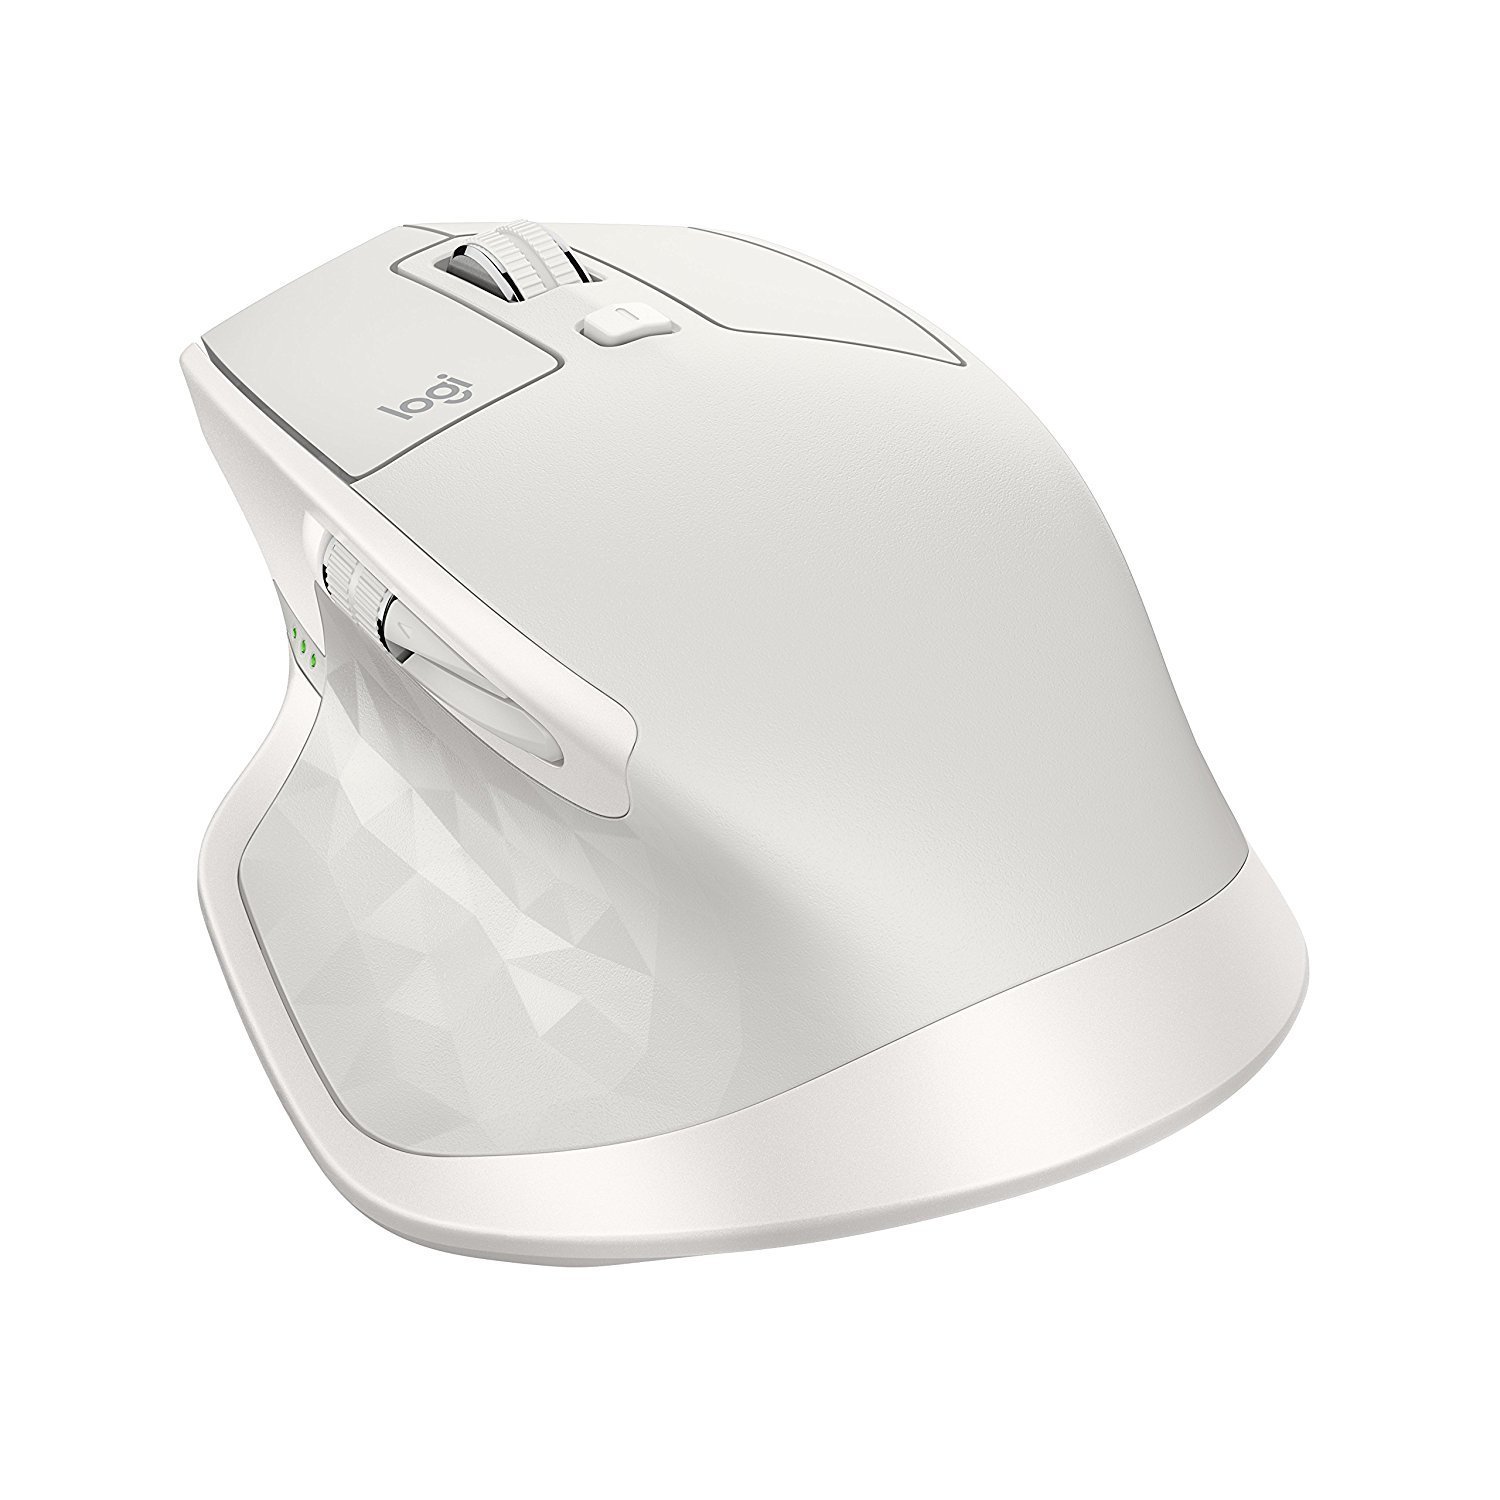 logitech mouse with macbook pro